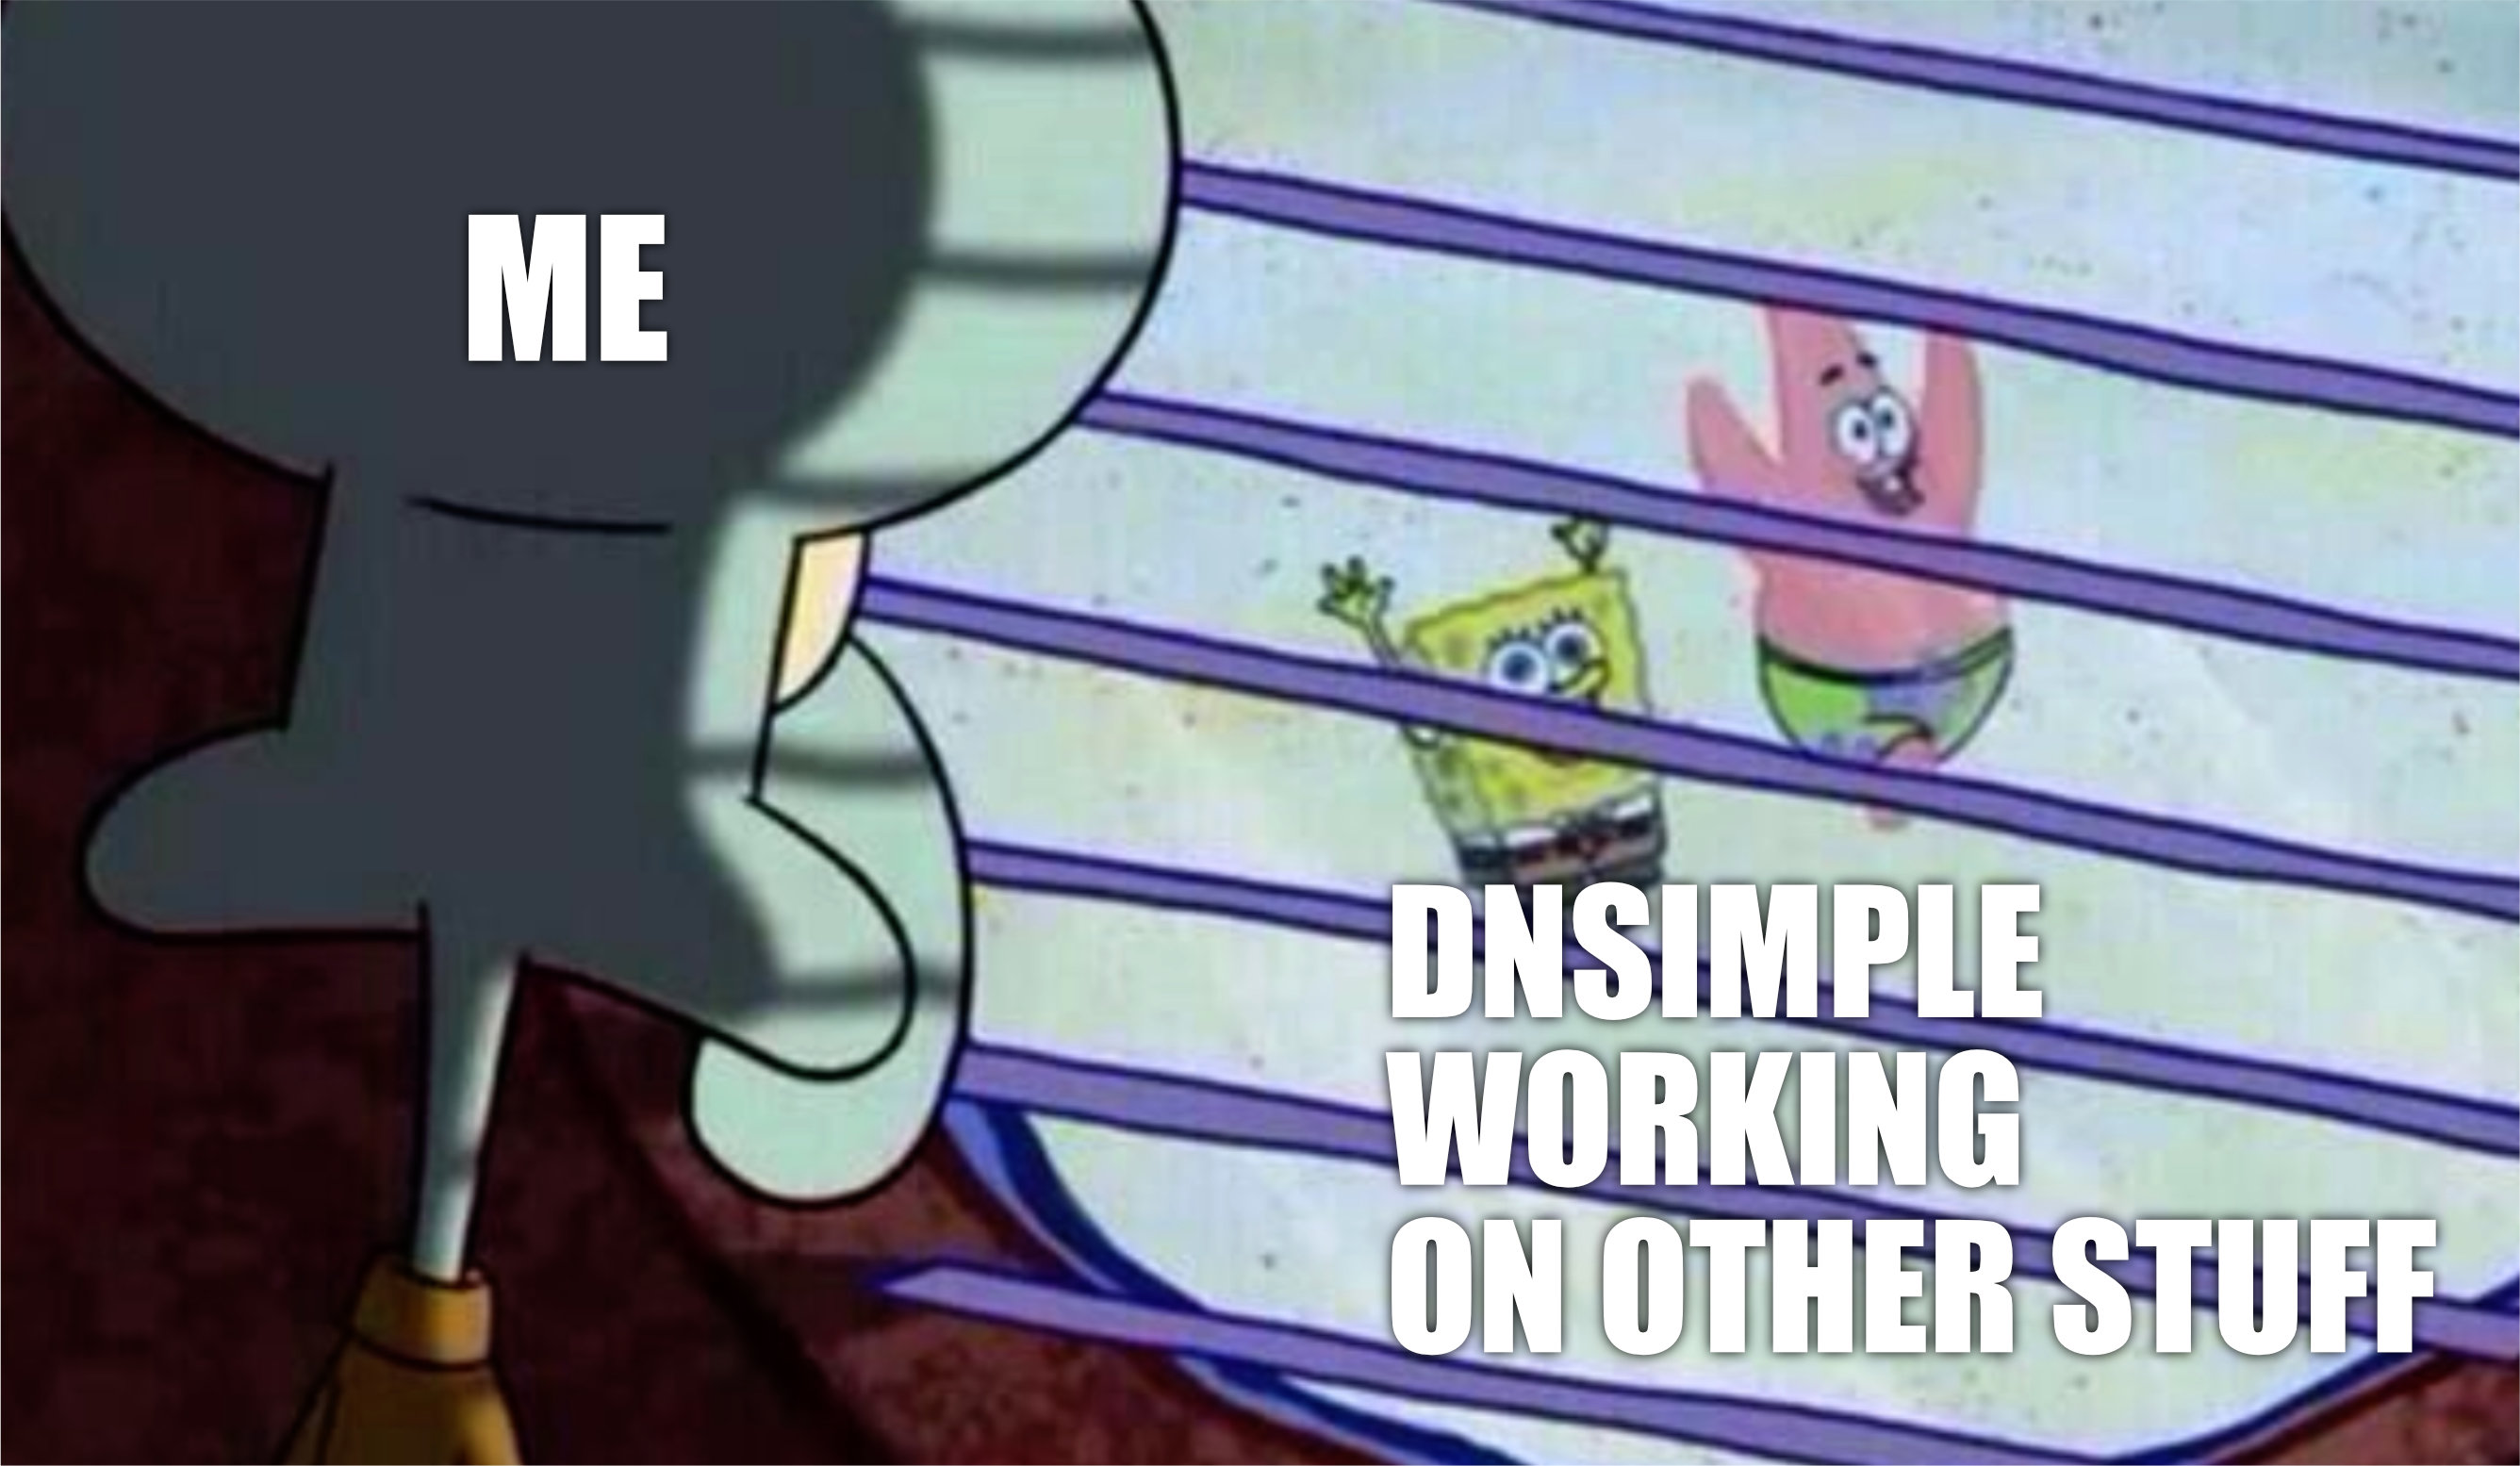 Me. DNSimple working on other stuff